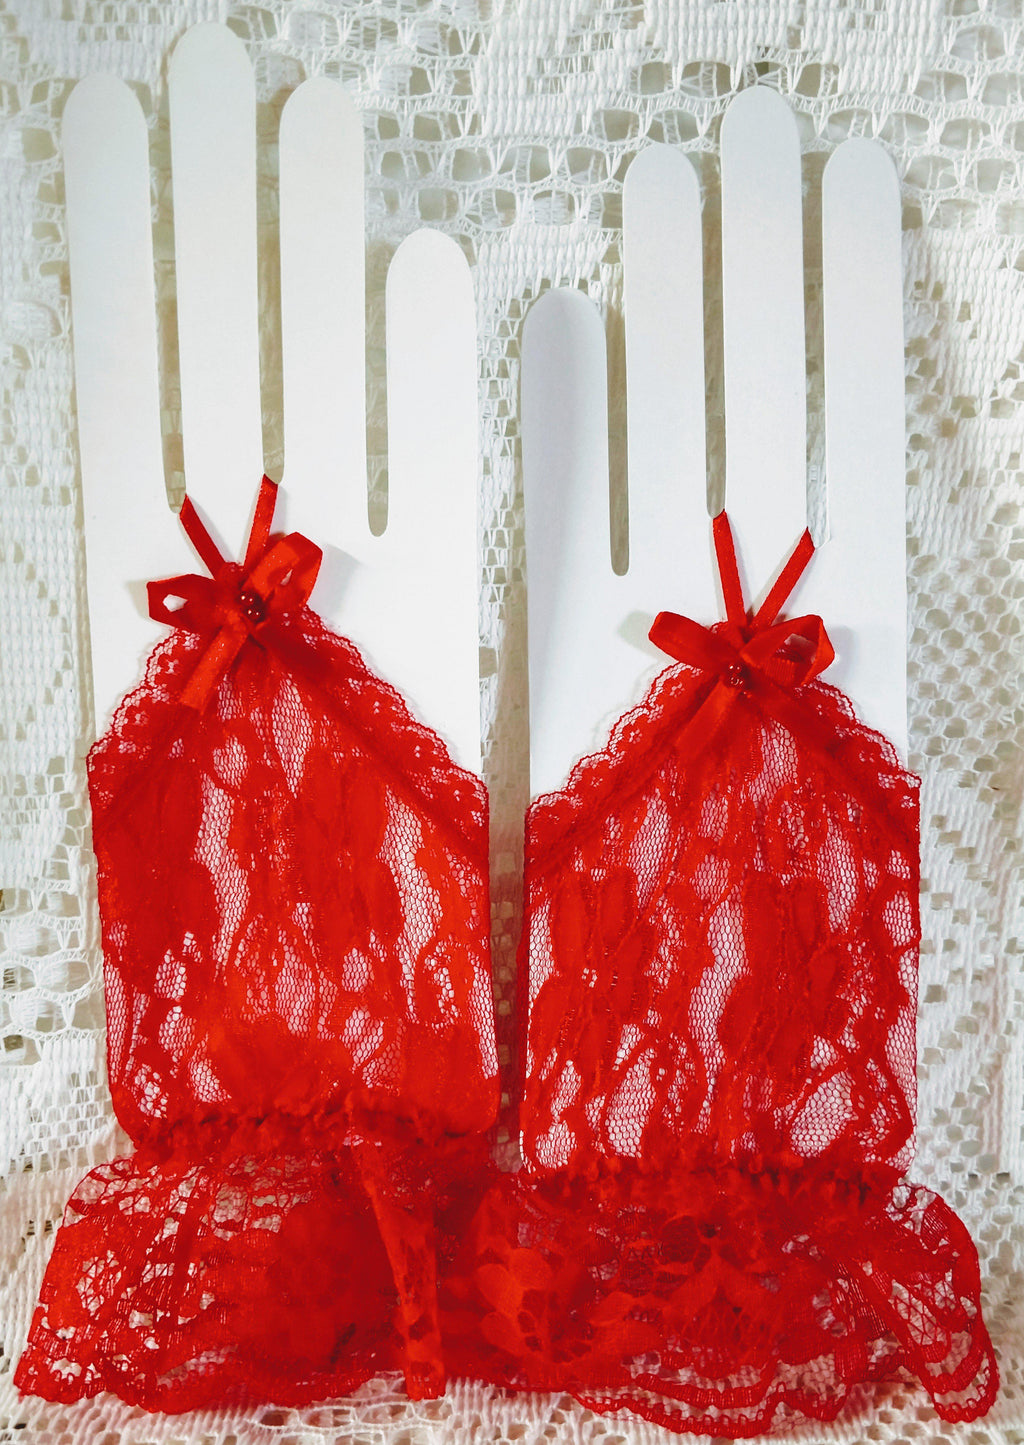 Red Lace Fingerless Gloves Perfect for Tea Parties and Bridal Affairs!